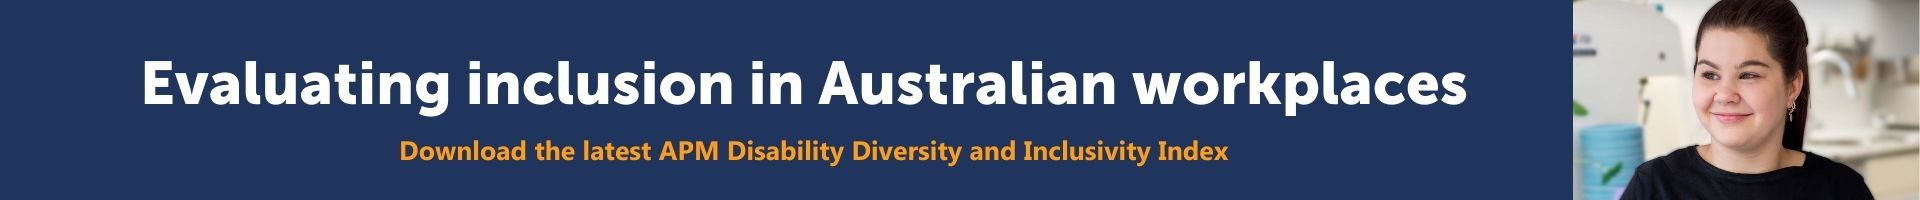 Download the latest edition of the APM Disability Diversity and Inclusivity Index